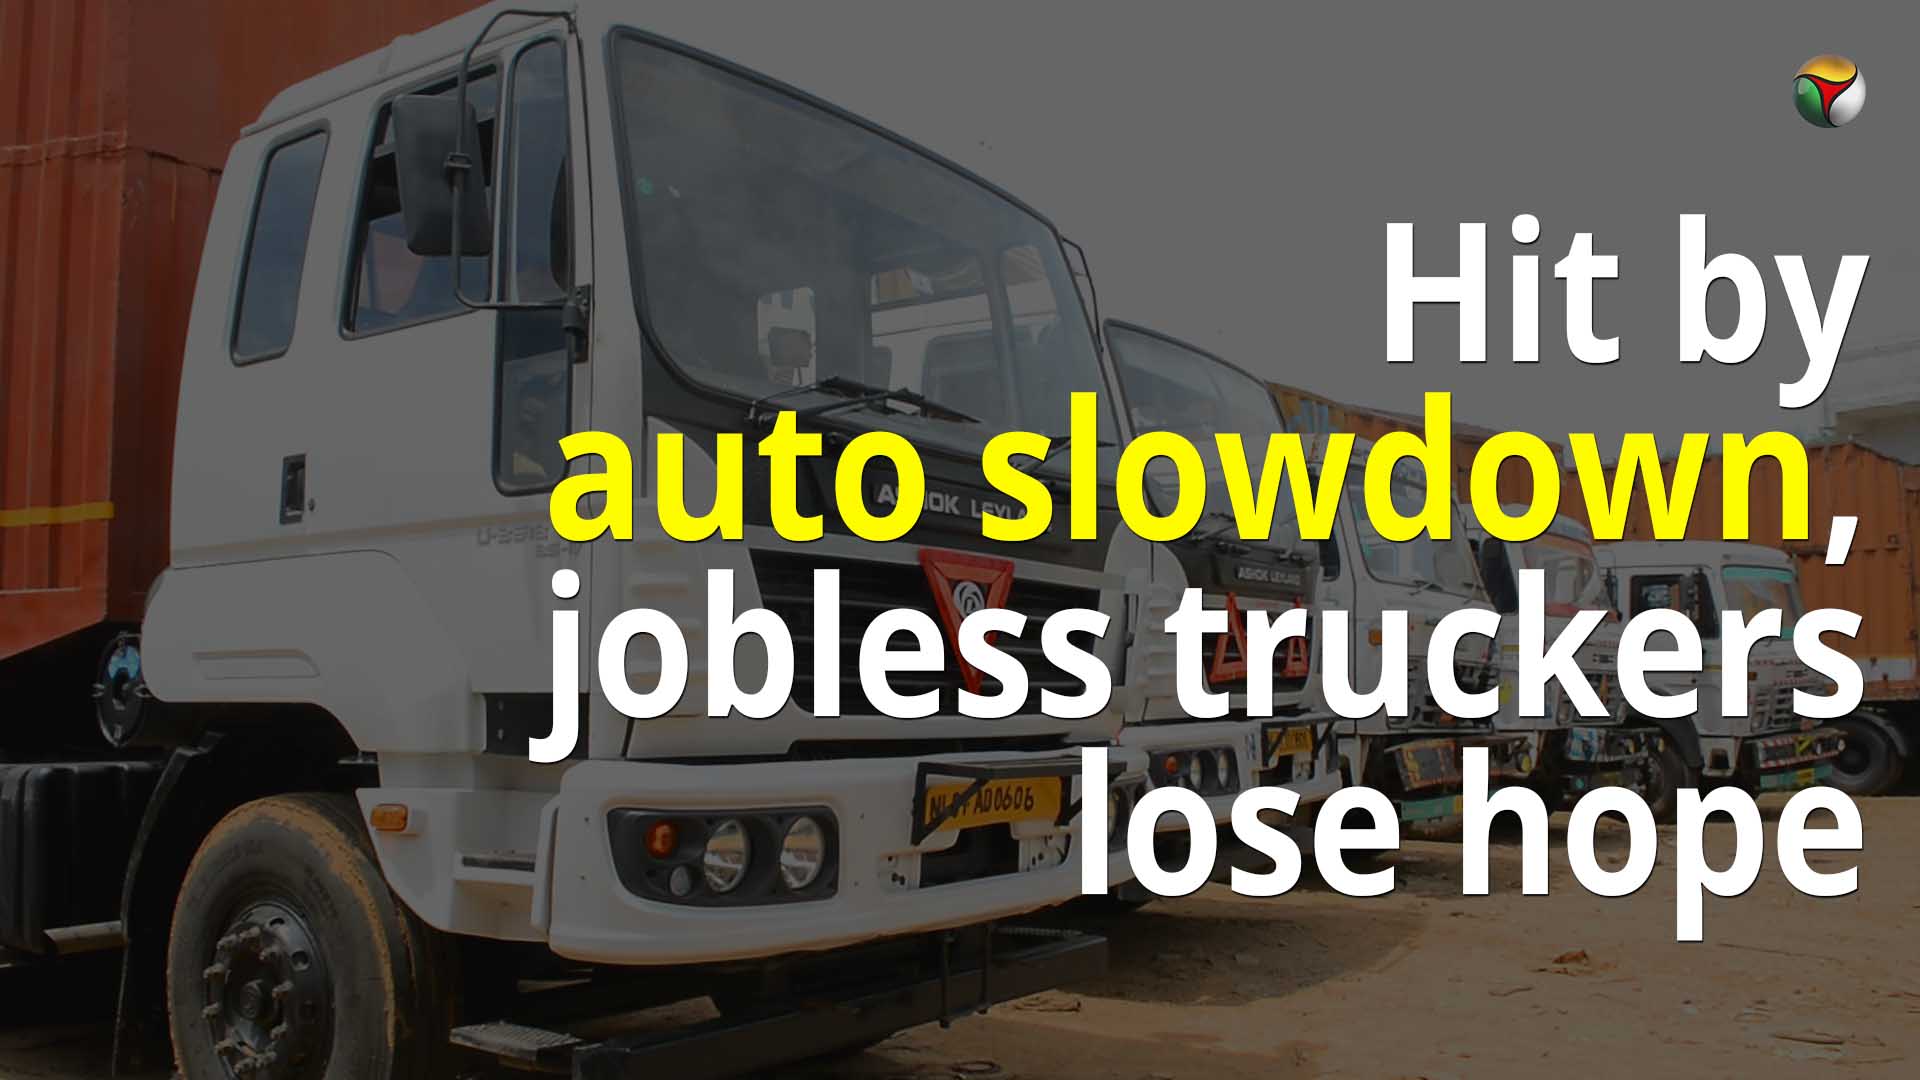 Hit by auto slowdown, jobless truckers lose hope